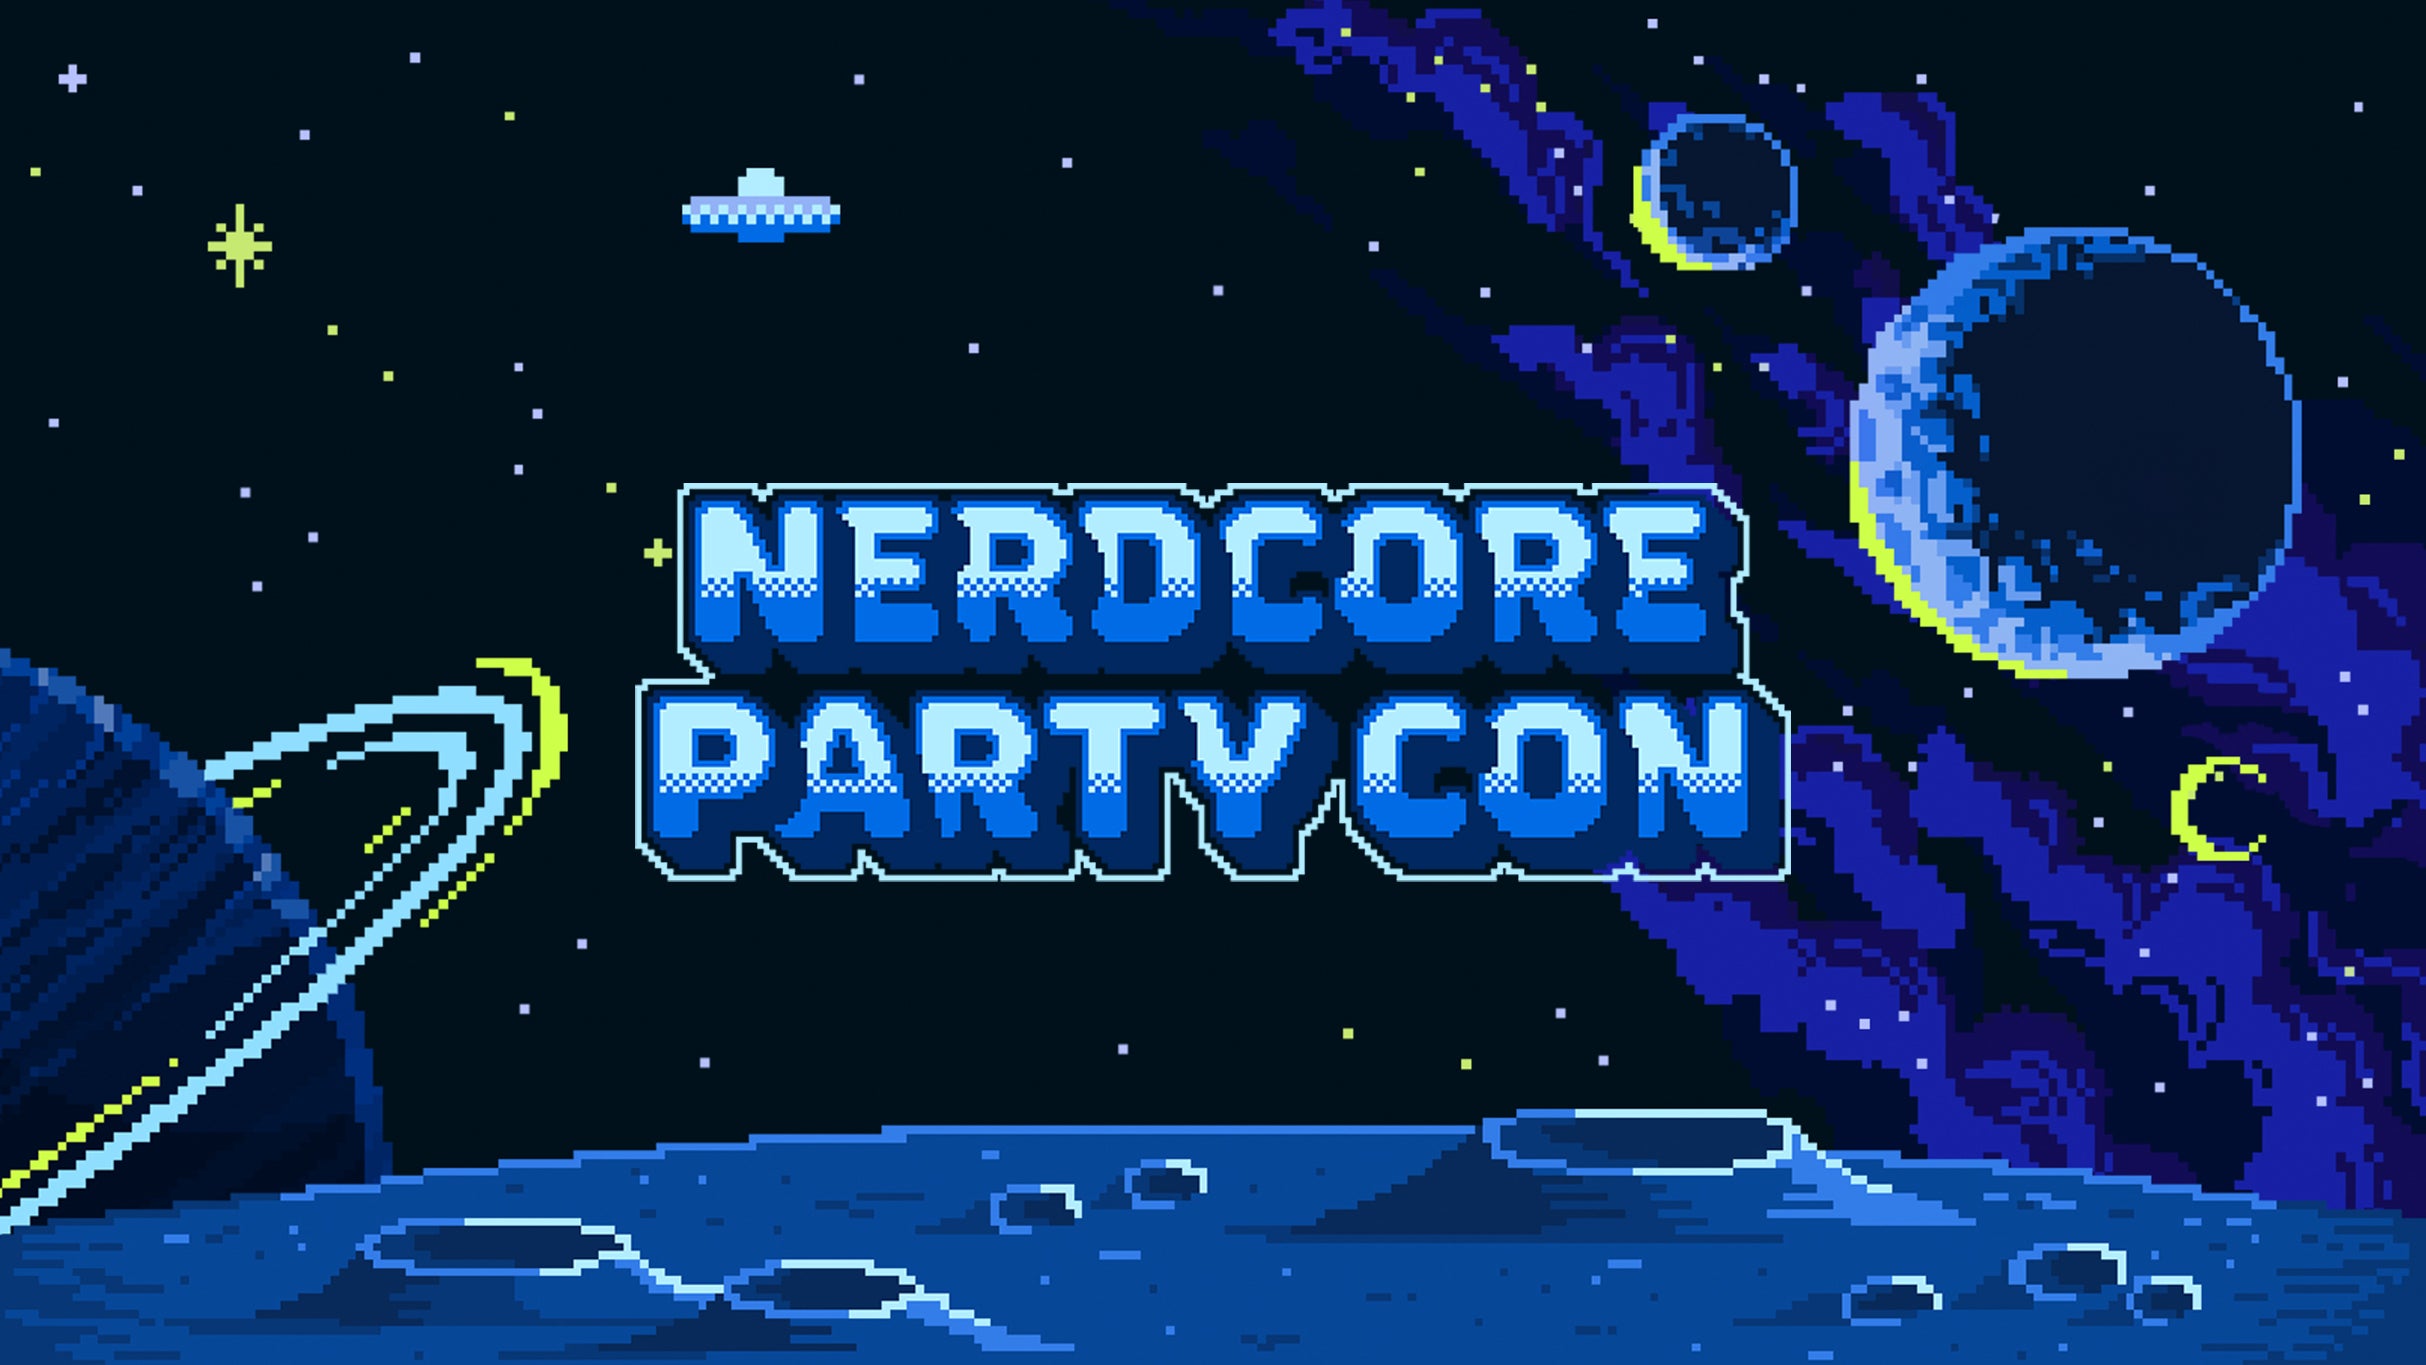 Weekend Tickets - Nerdcore Party Convention in Raleigh promo photo for April Fools 10% Discount  presale offer code